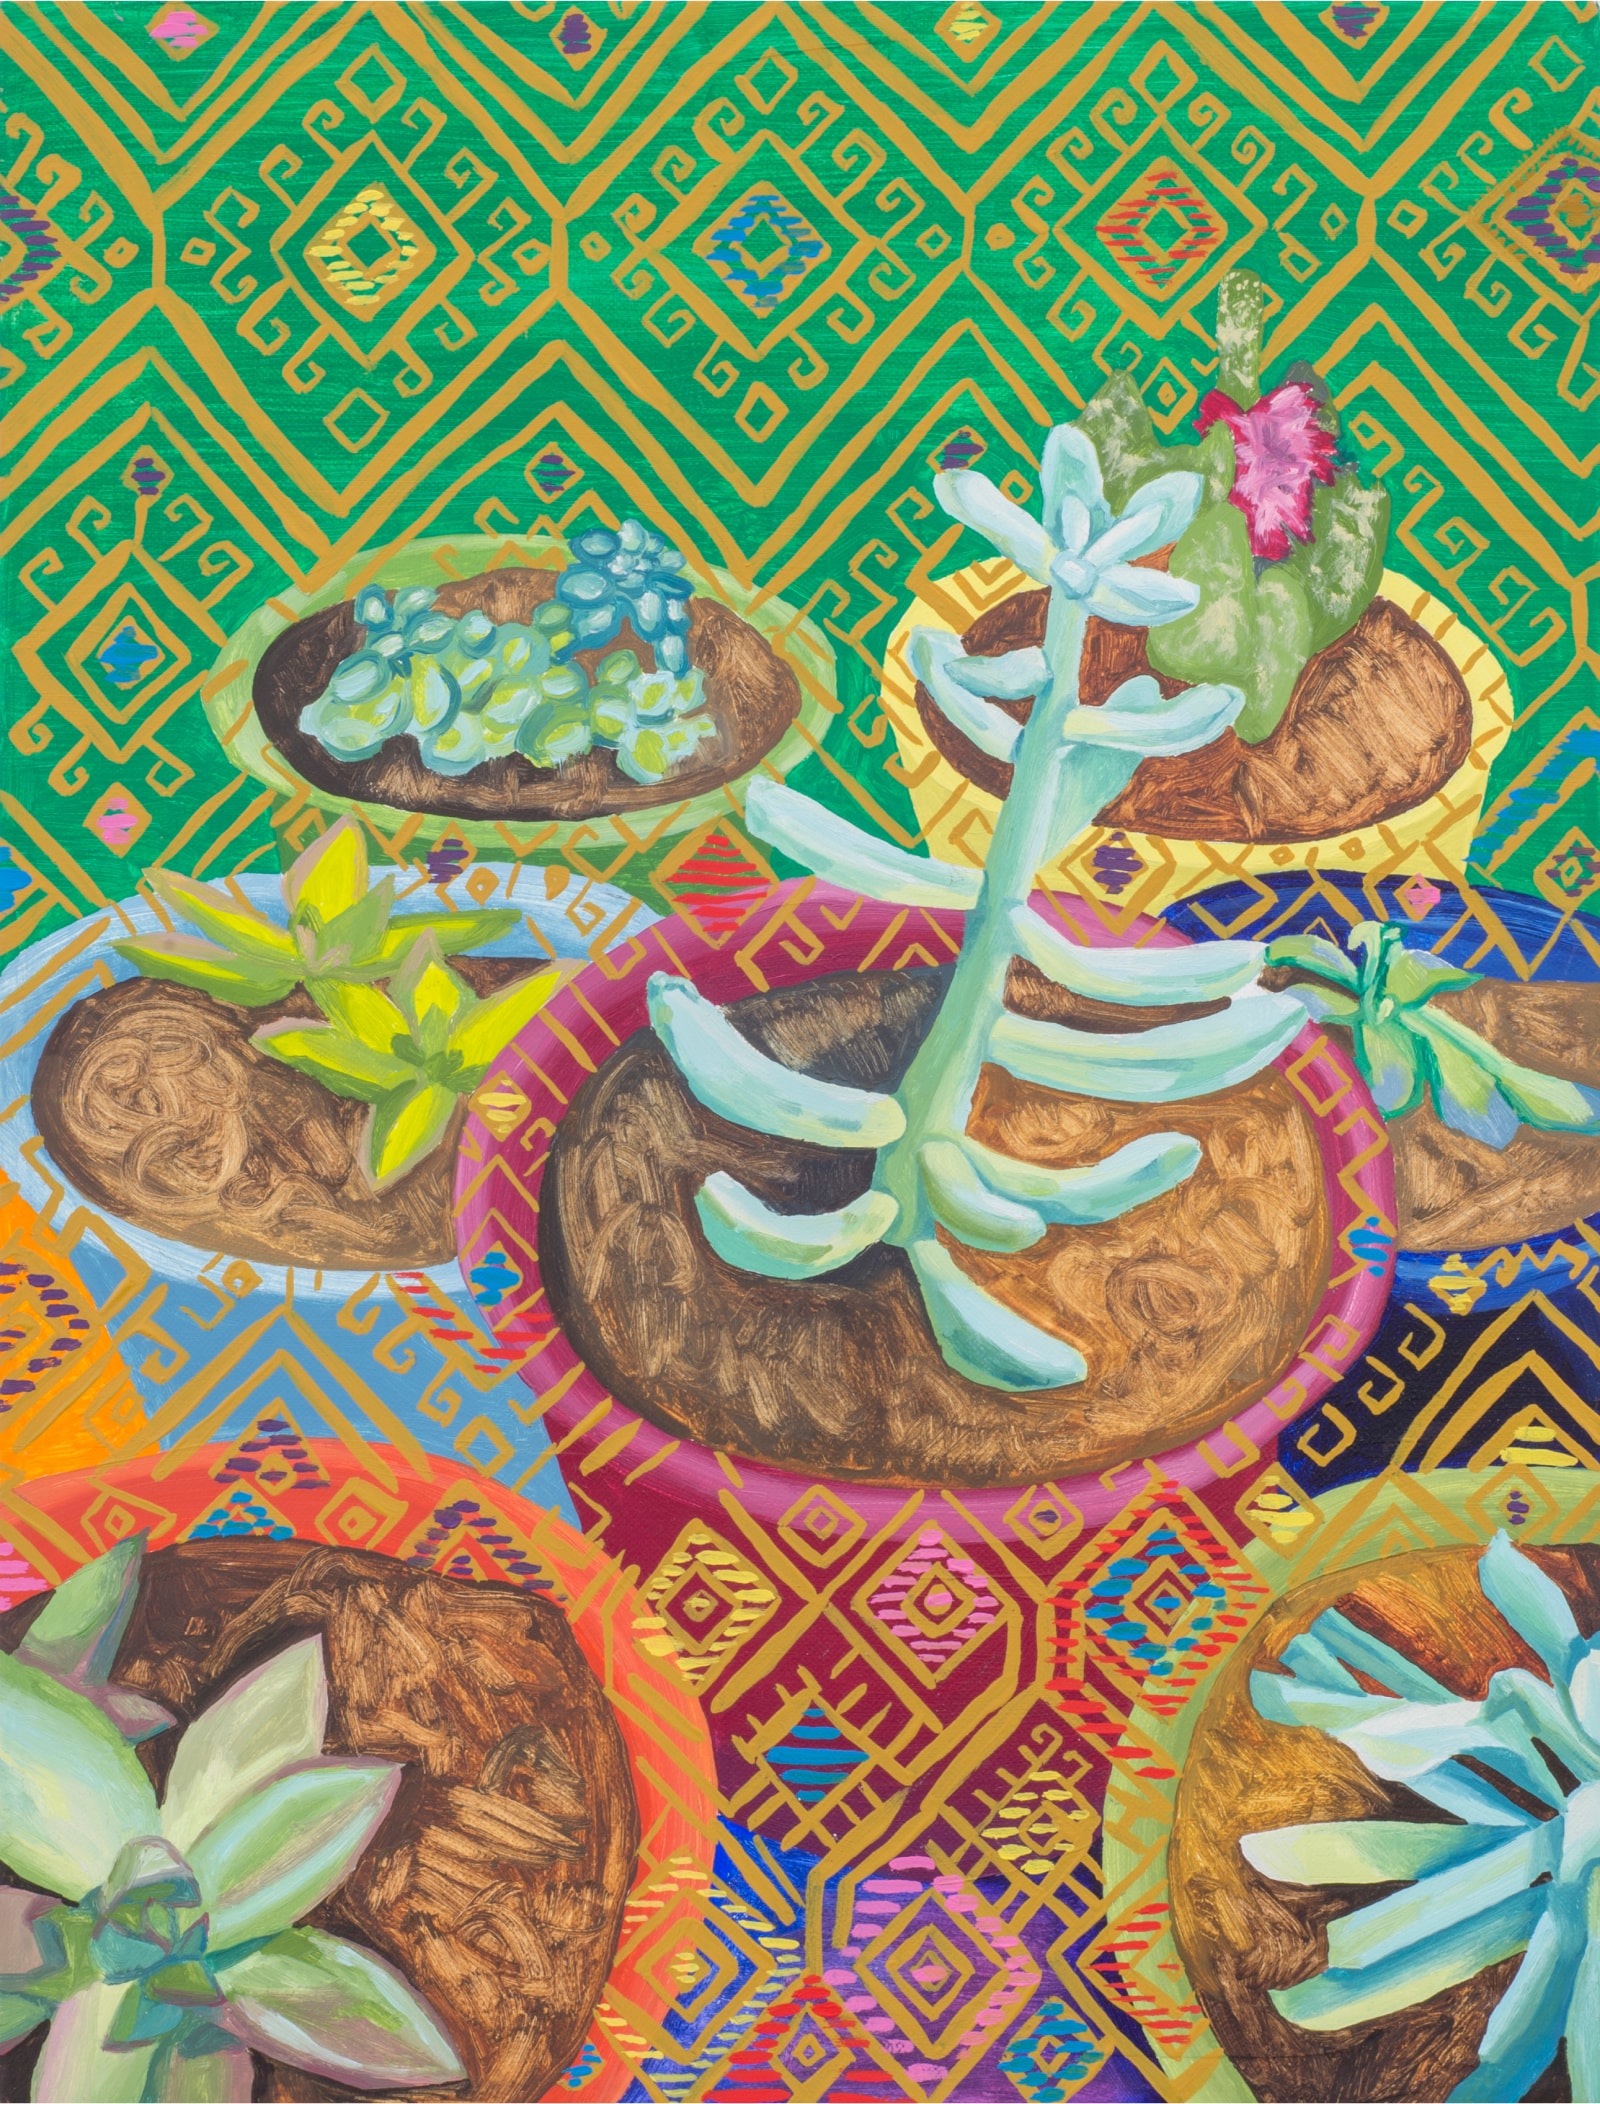 Nisenbaum’s “Succulent Weave” featuring seven potted succulents with a woven gold pattern overlaid on the pots and background